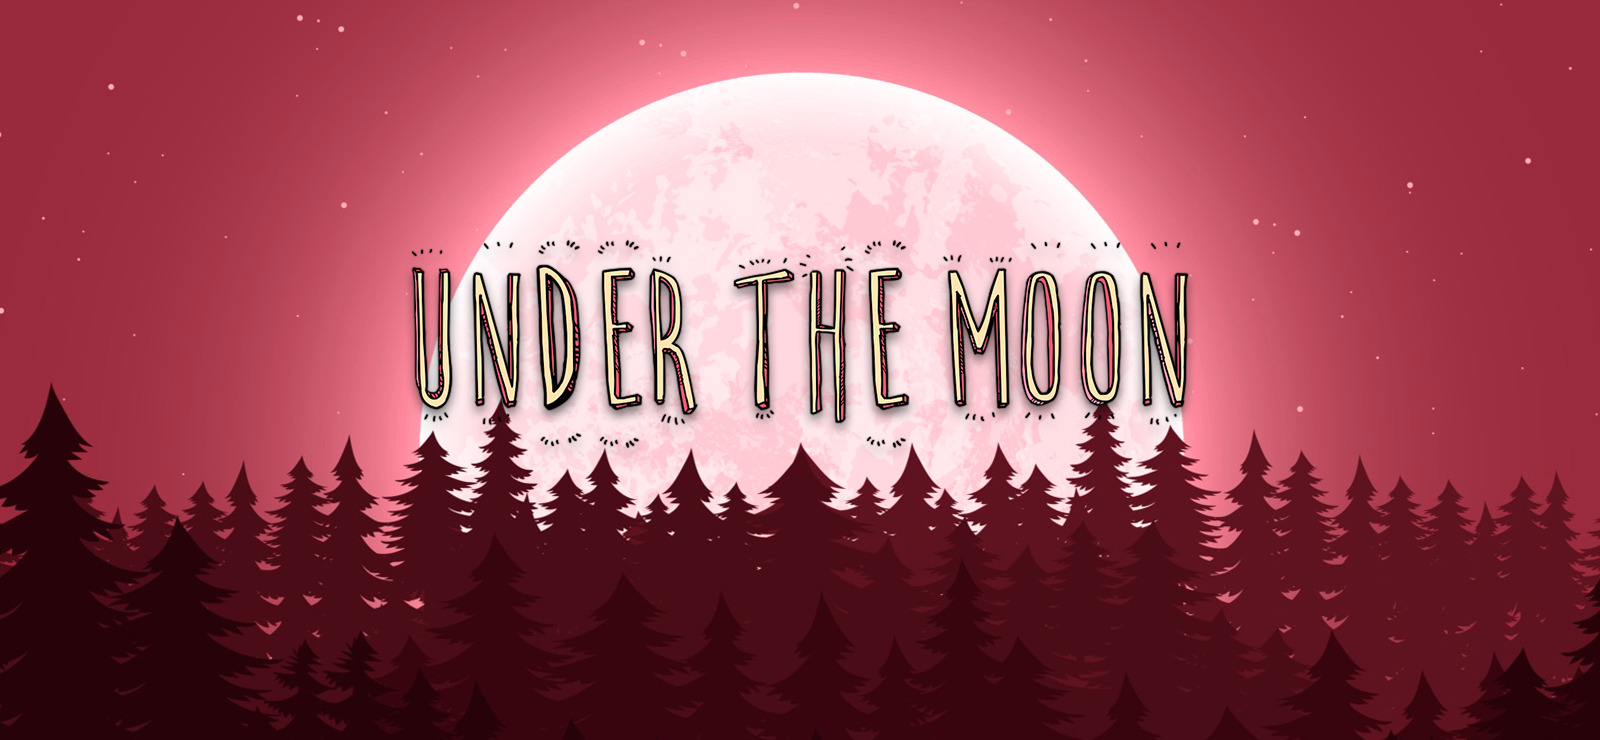 Join Ali Kemal on his fantastic journey on the path of true love!







Under the Moon i